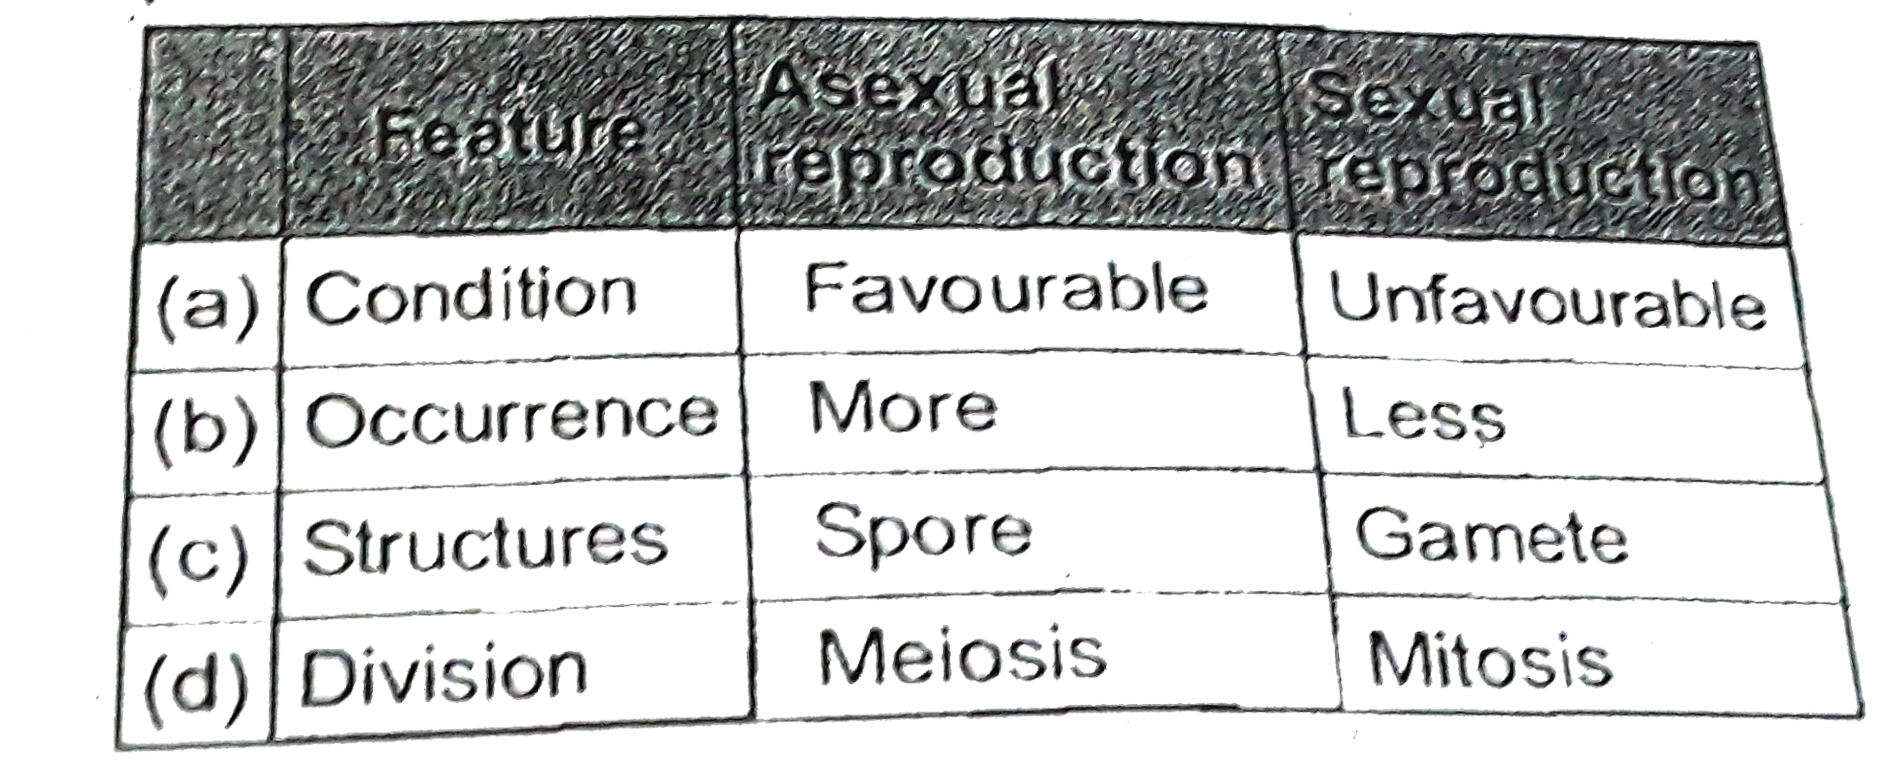 Choose correct option for asexual and sexual reproduction in organisms that have a relatively simple organisation.